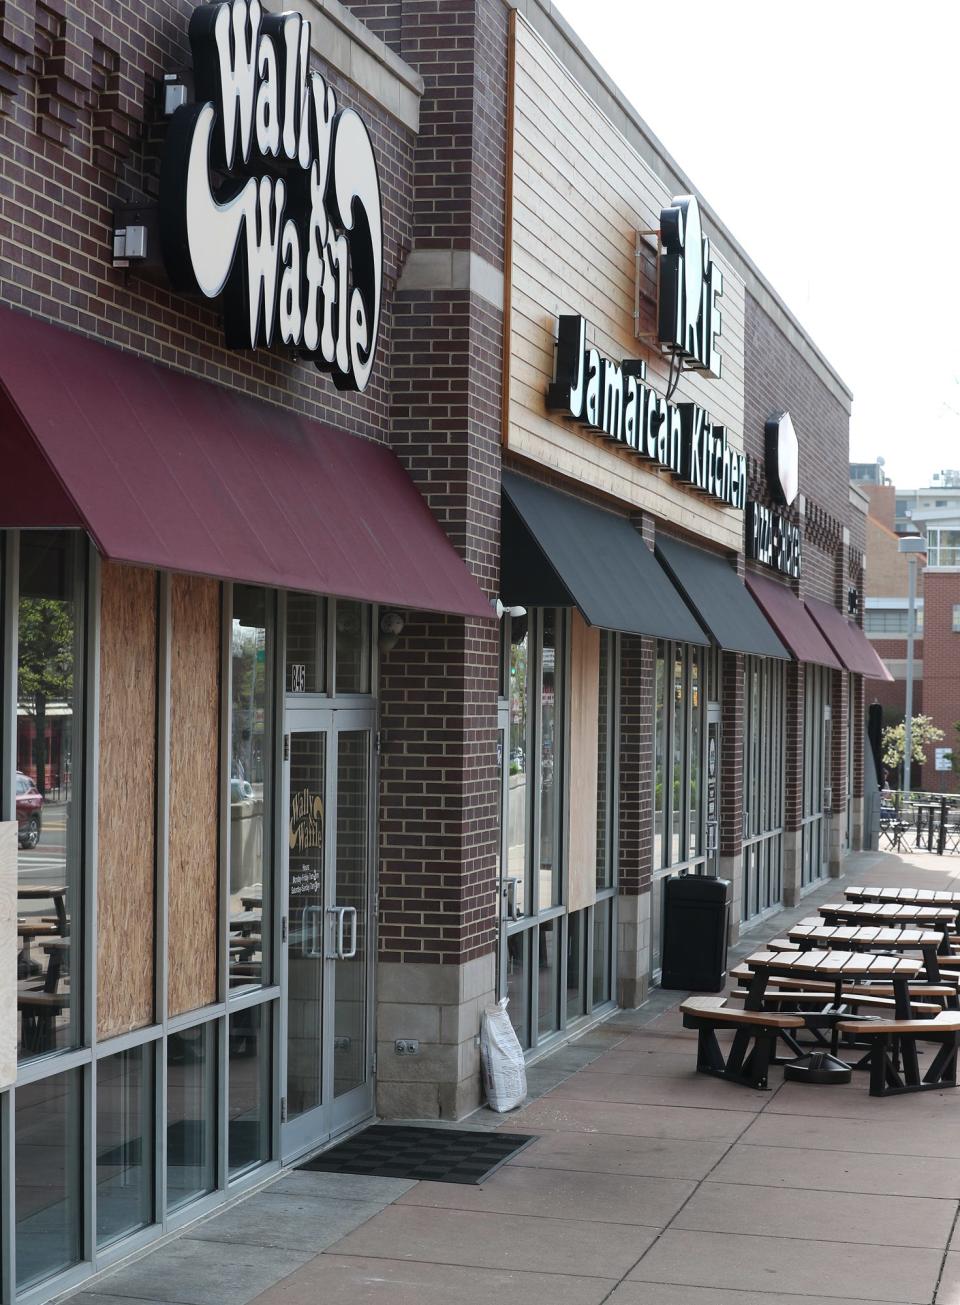 Wally Waffle, Irie Jamaican Kitchen and Chipotle Mexican Grill had broken windows during evening disturbances in Highland Square in Akron on Thursday. It's unclear if the unrest in the area was related to Jayland Walker protests.